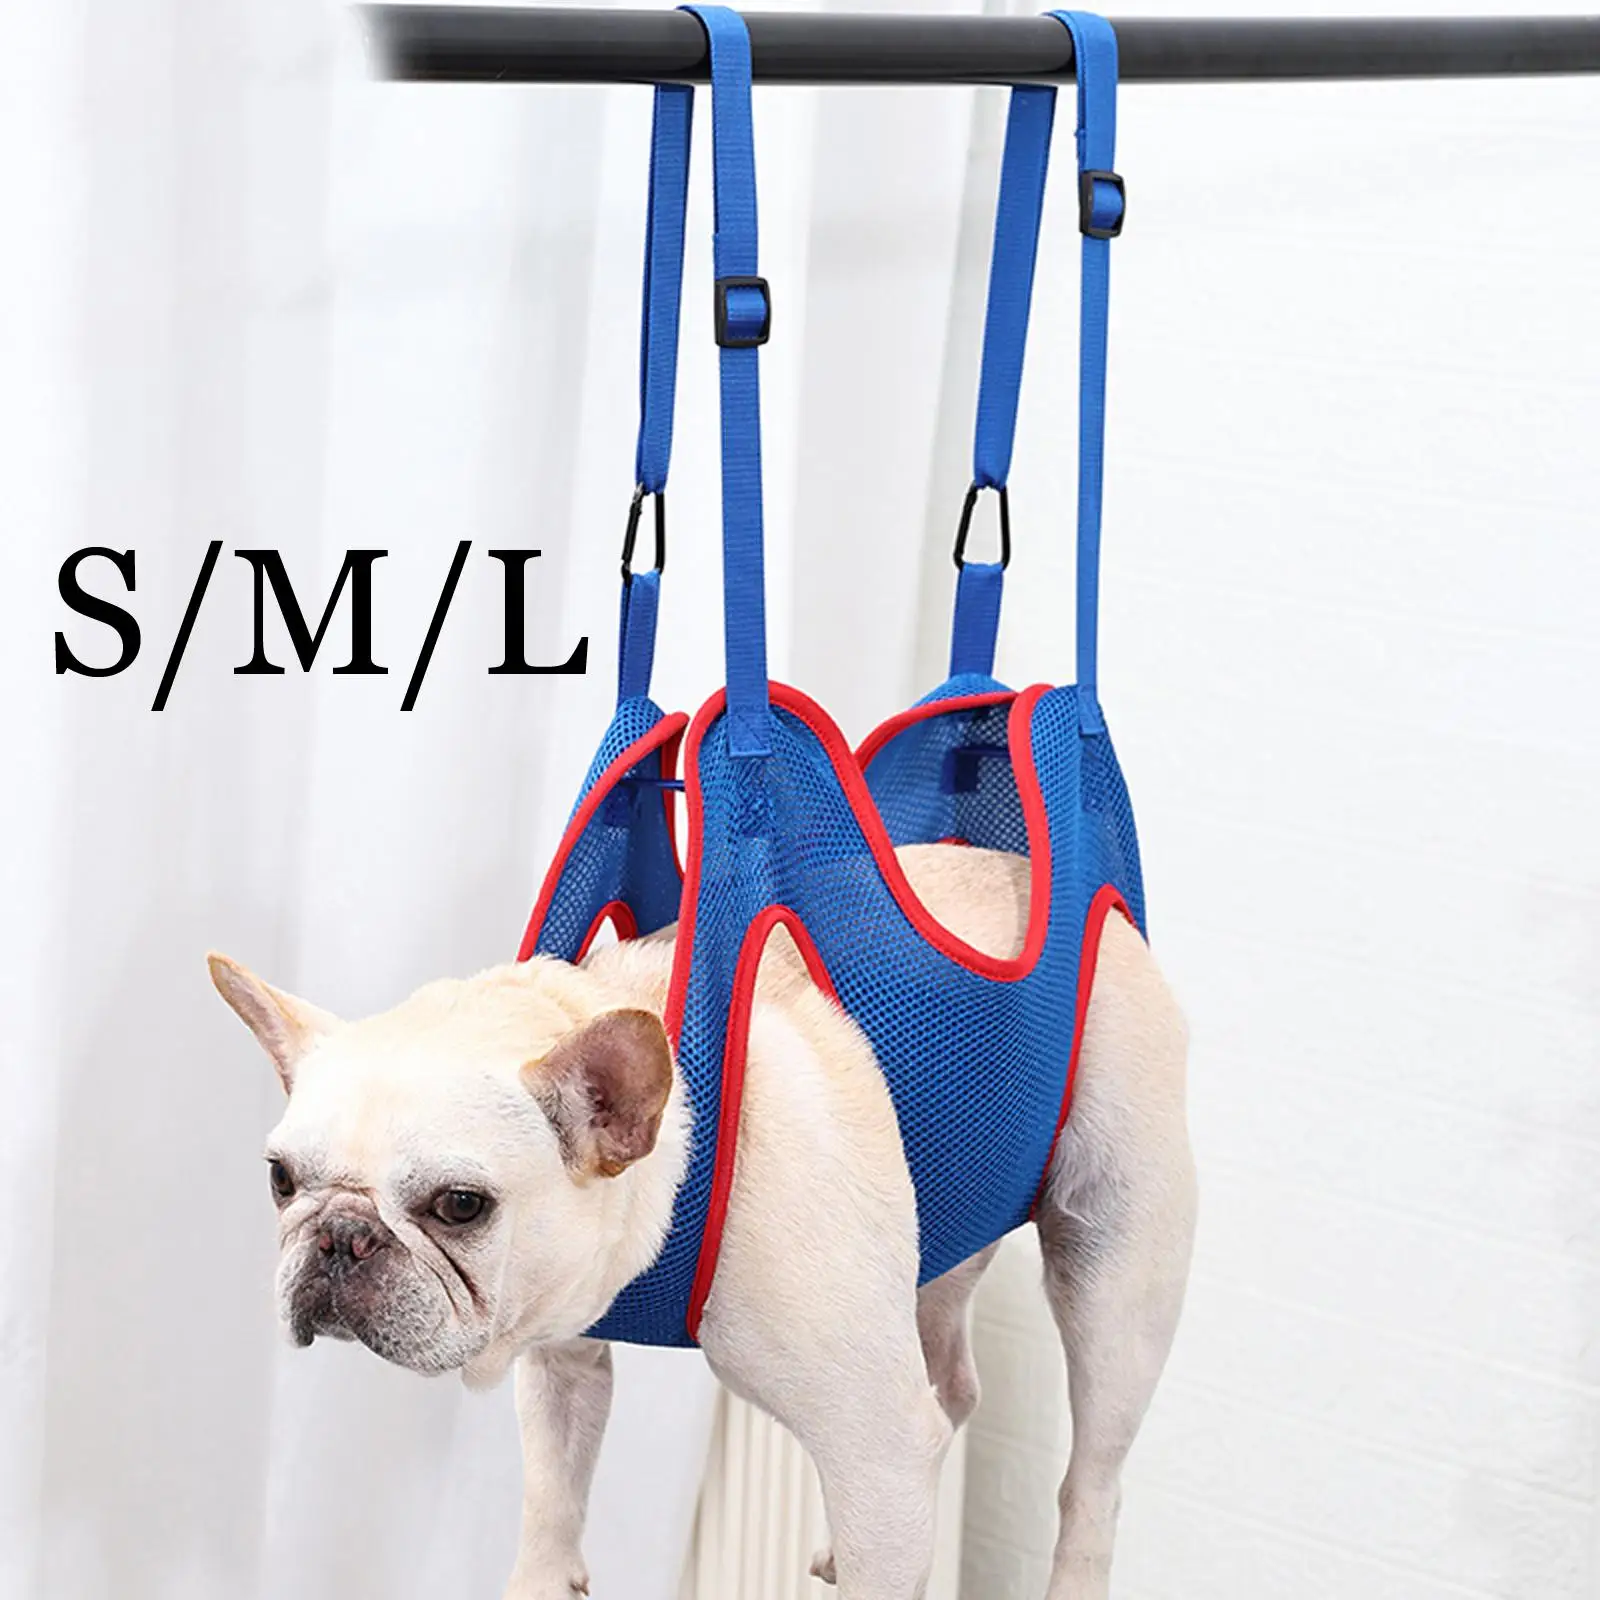 Portable Dogs Hanging Holder Hanger with 2 Hooks Pet Grooming Hammock Harness for Grooming Bathing Trimming Claw Care Examining